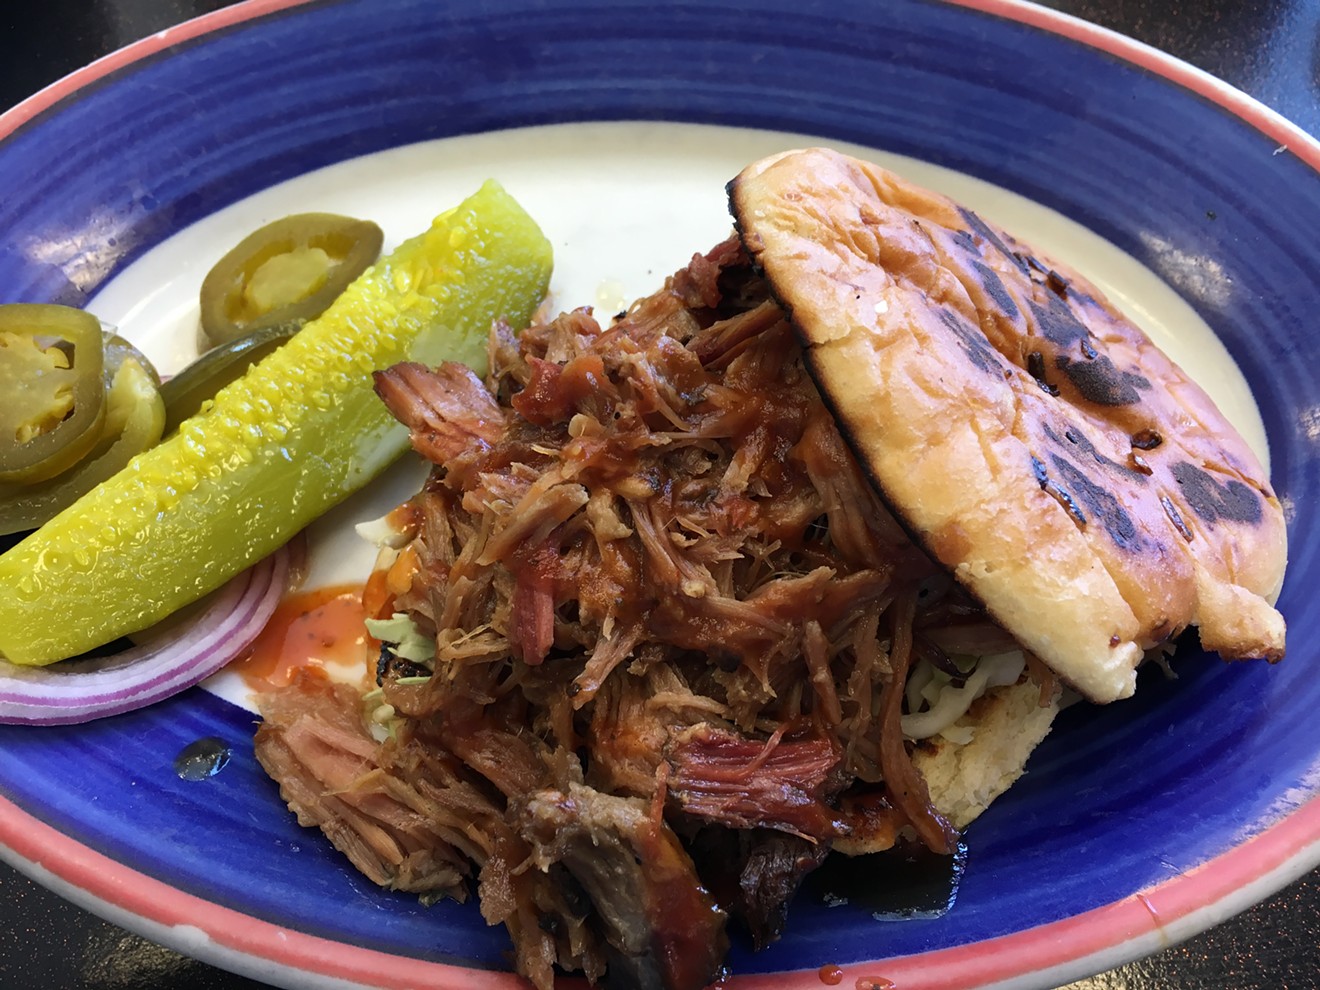 This pulled pork sandwich is only $3.50 on Tuesdays at Cafe UR Way.